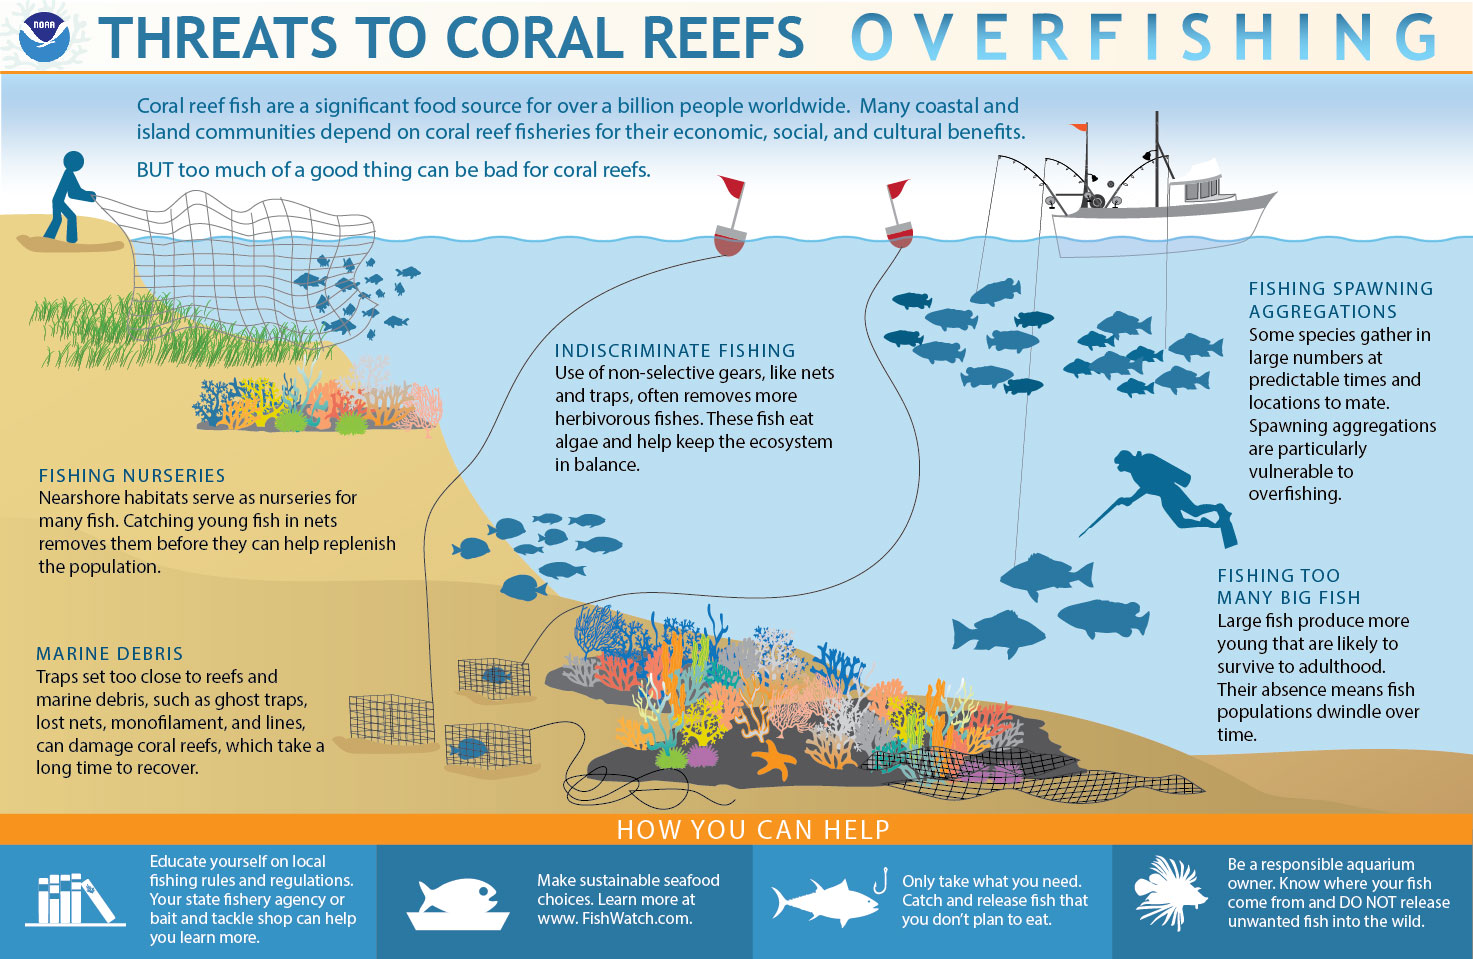 Infographic that describes how overfishing destroys coral reefs using imagery of fishing boats, sea life, and reefs coupled with informational paragraphs.